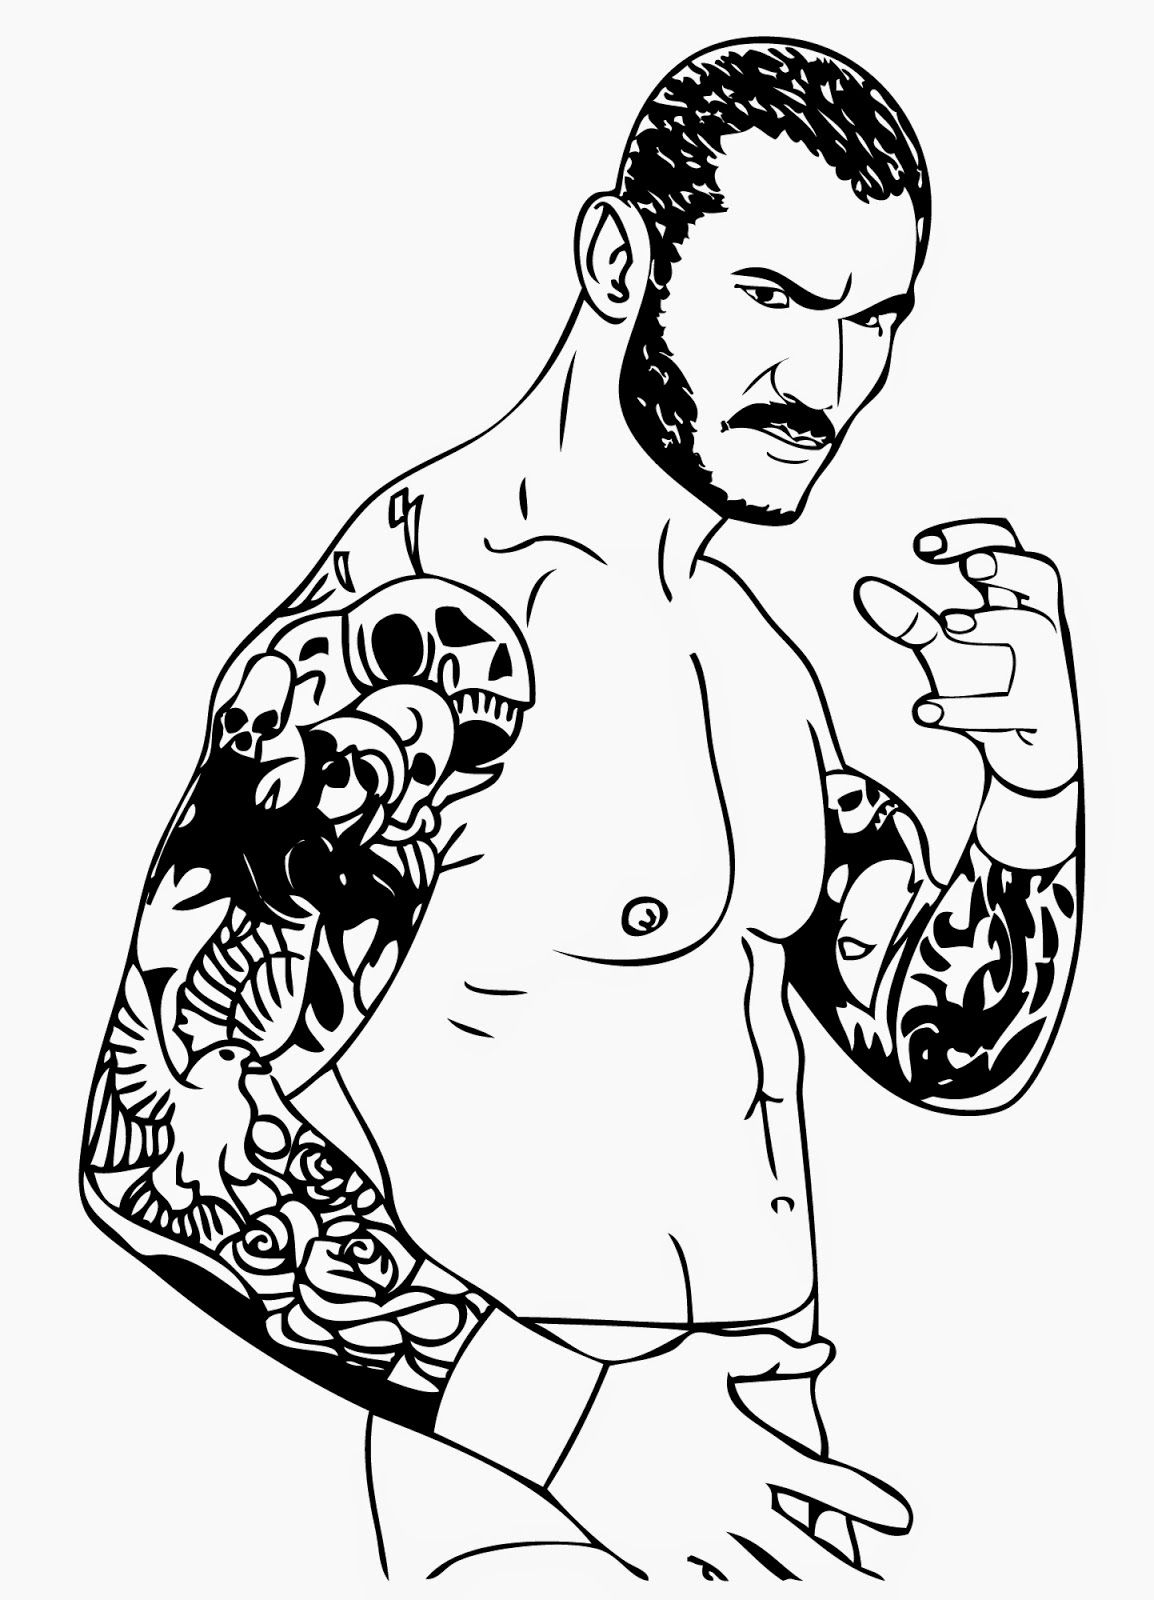 Wwe Smackdown - Coloring Pages for Kids and for Adults